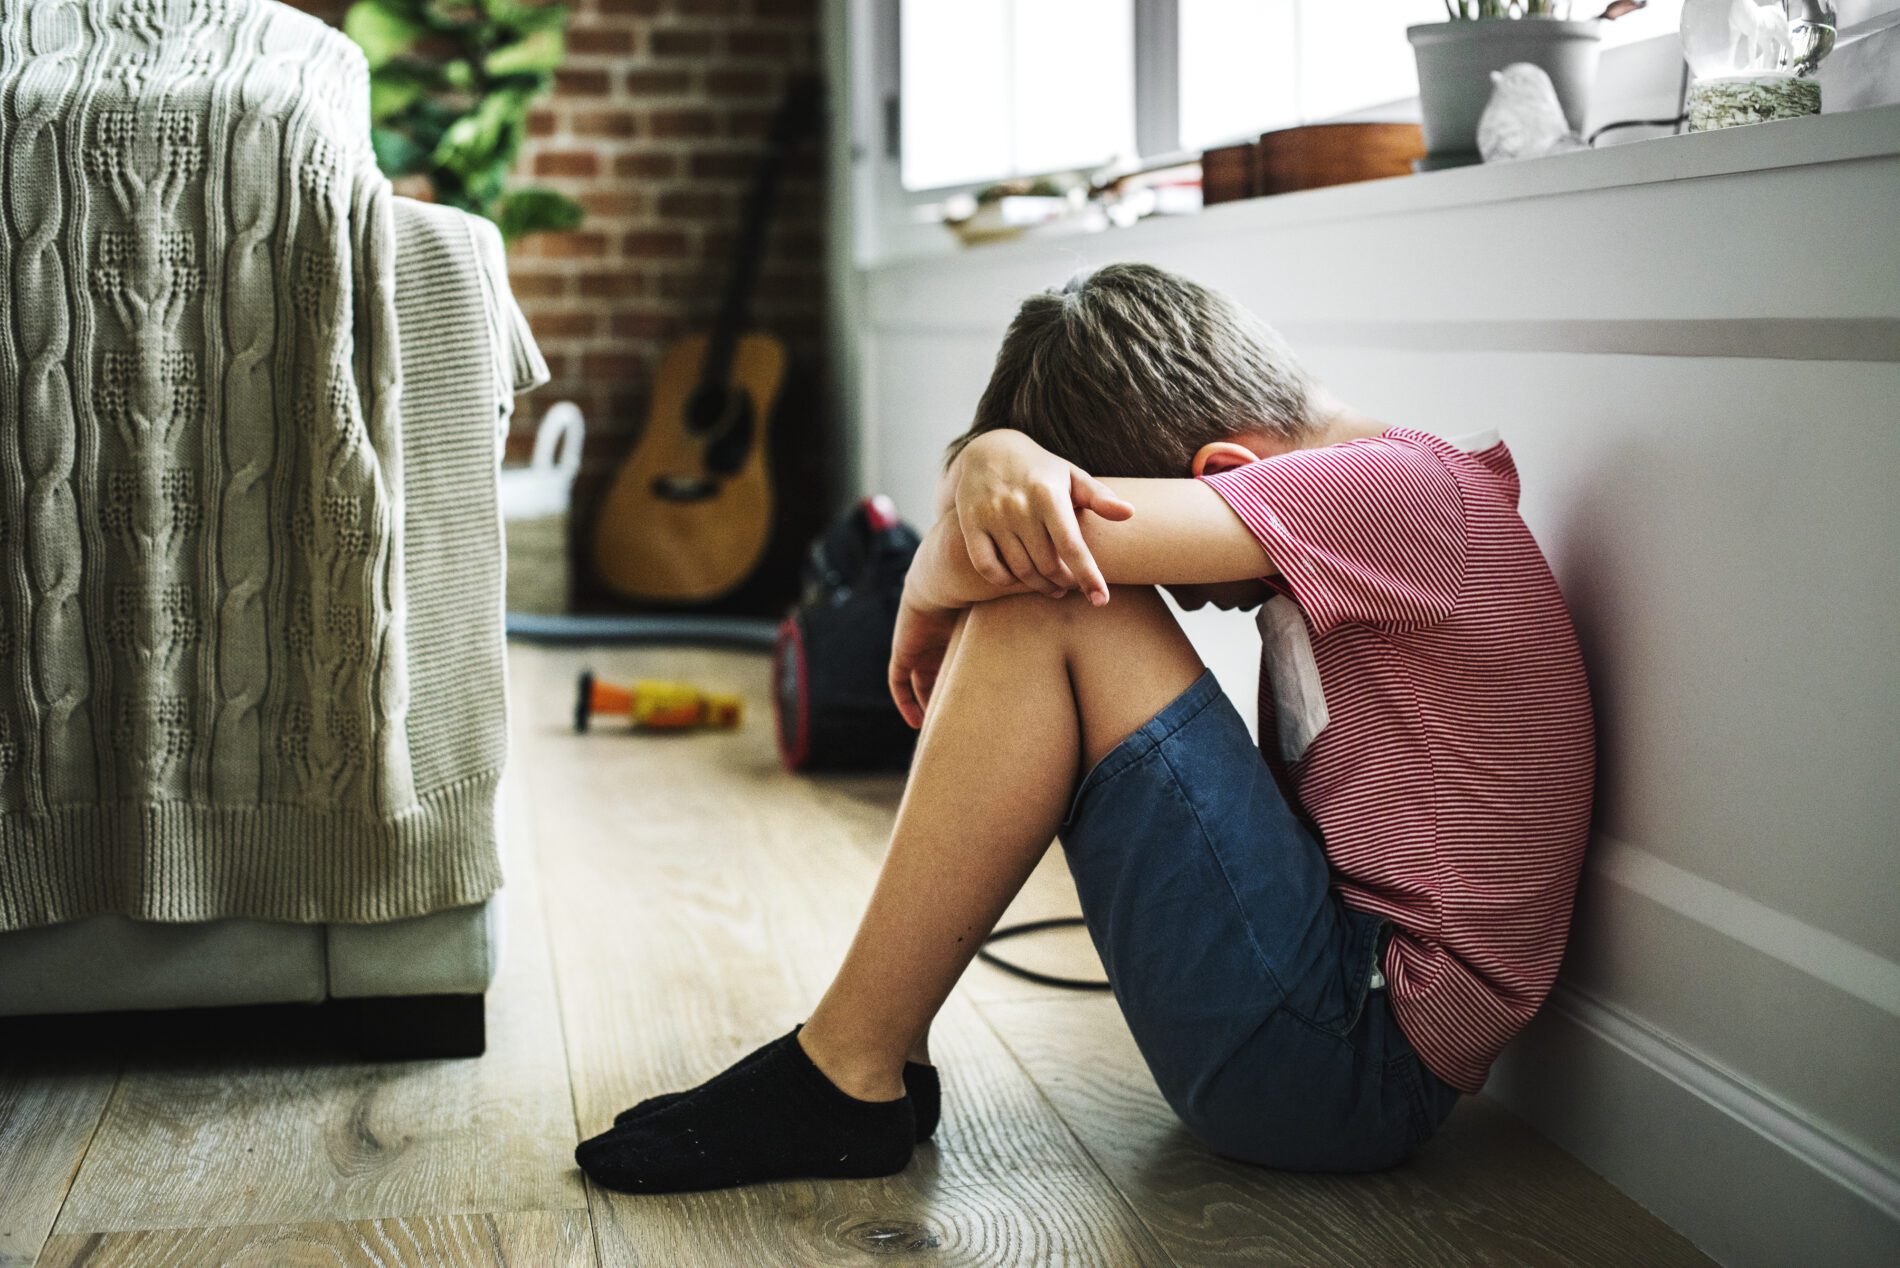 Depressed Kids On The Rise: Best Tips from Innovative Health